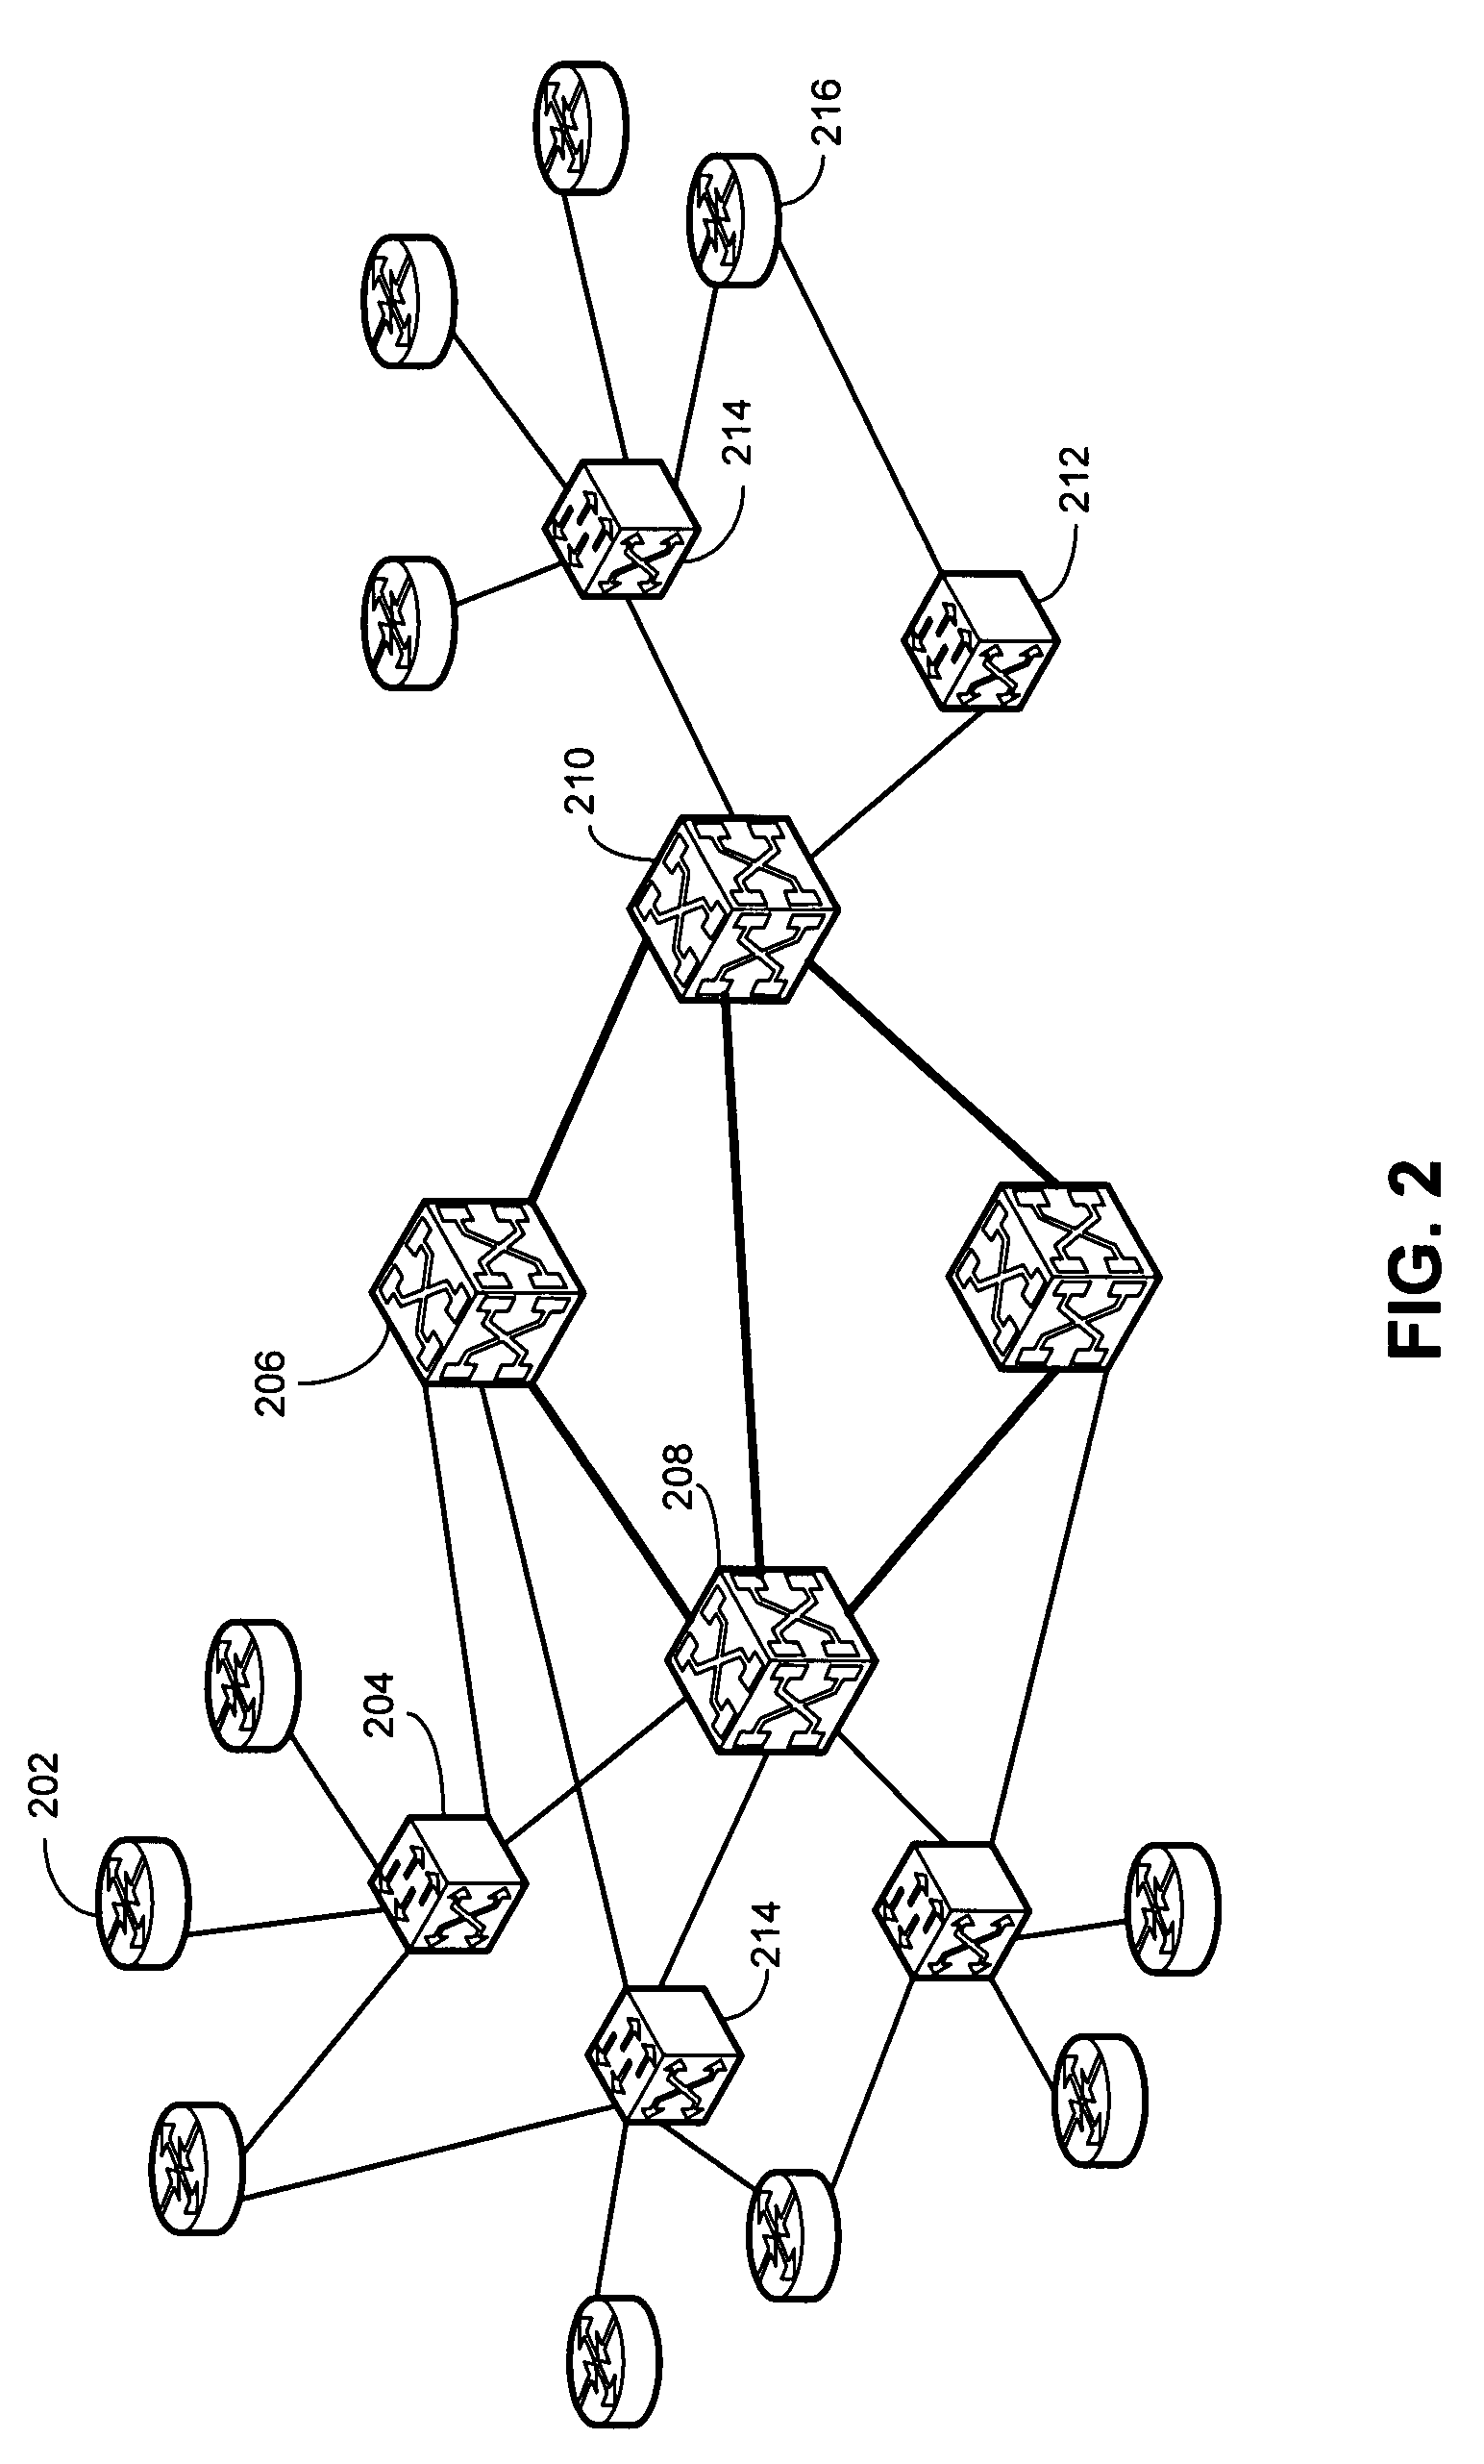 Method and system for discovering network paths